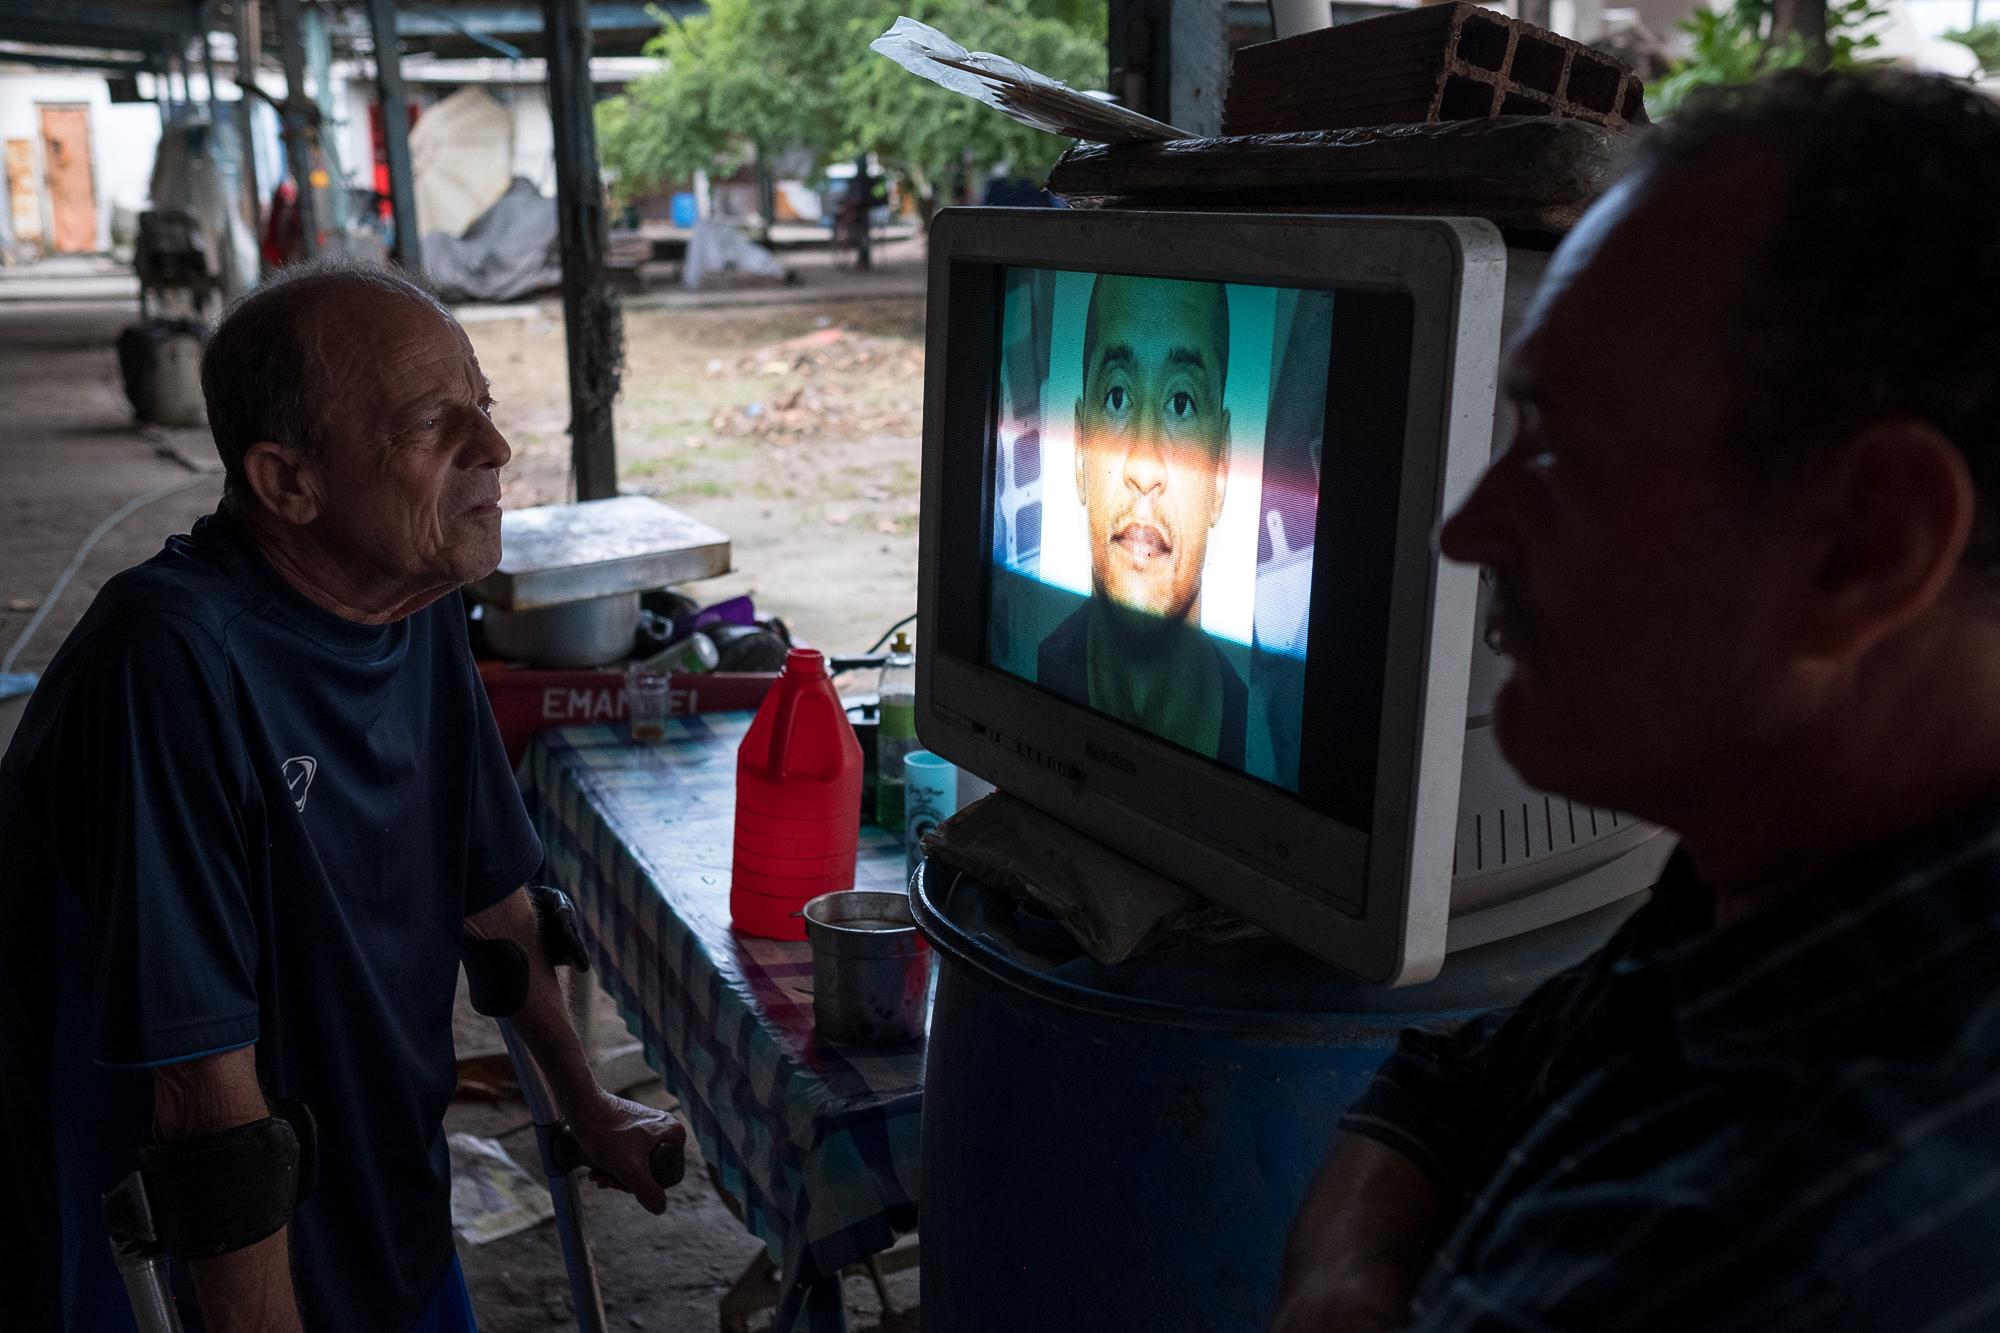 Luis and listens close to the television for a report on a man who lives nearby and was alleged...